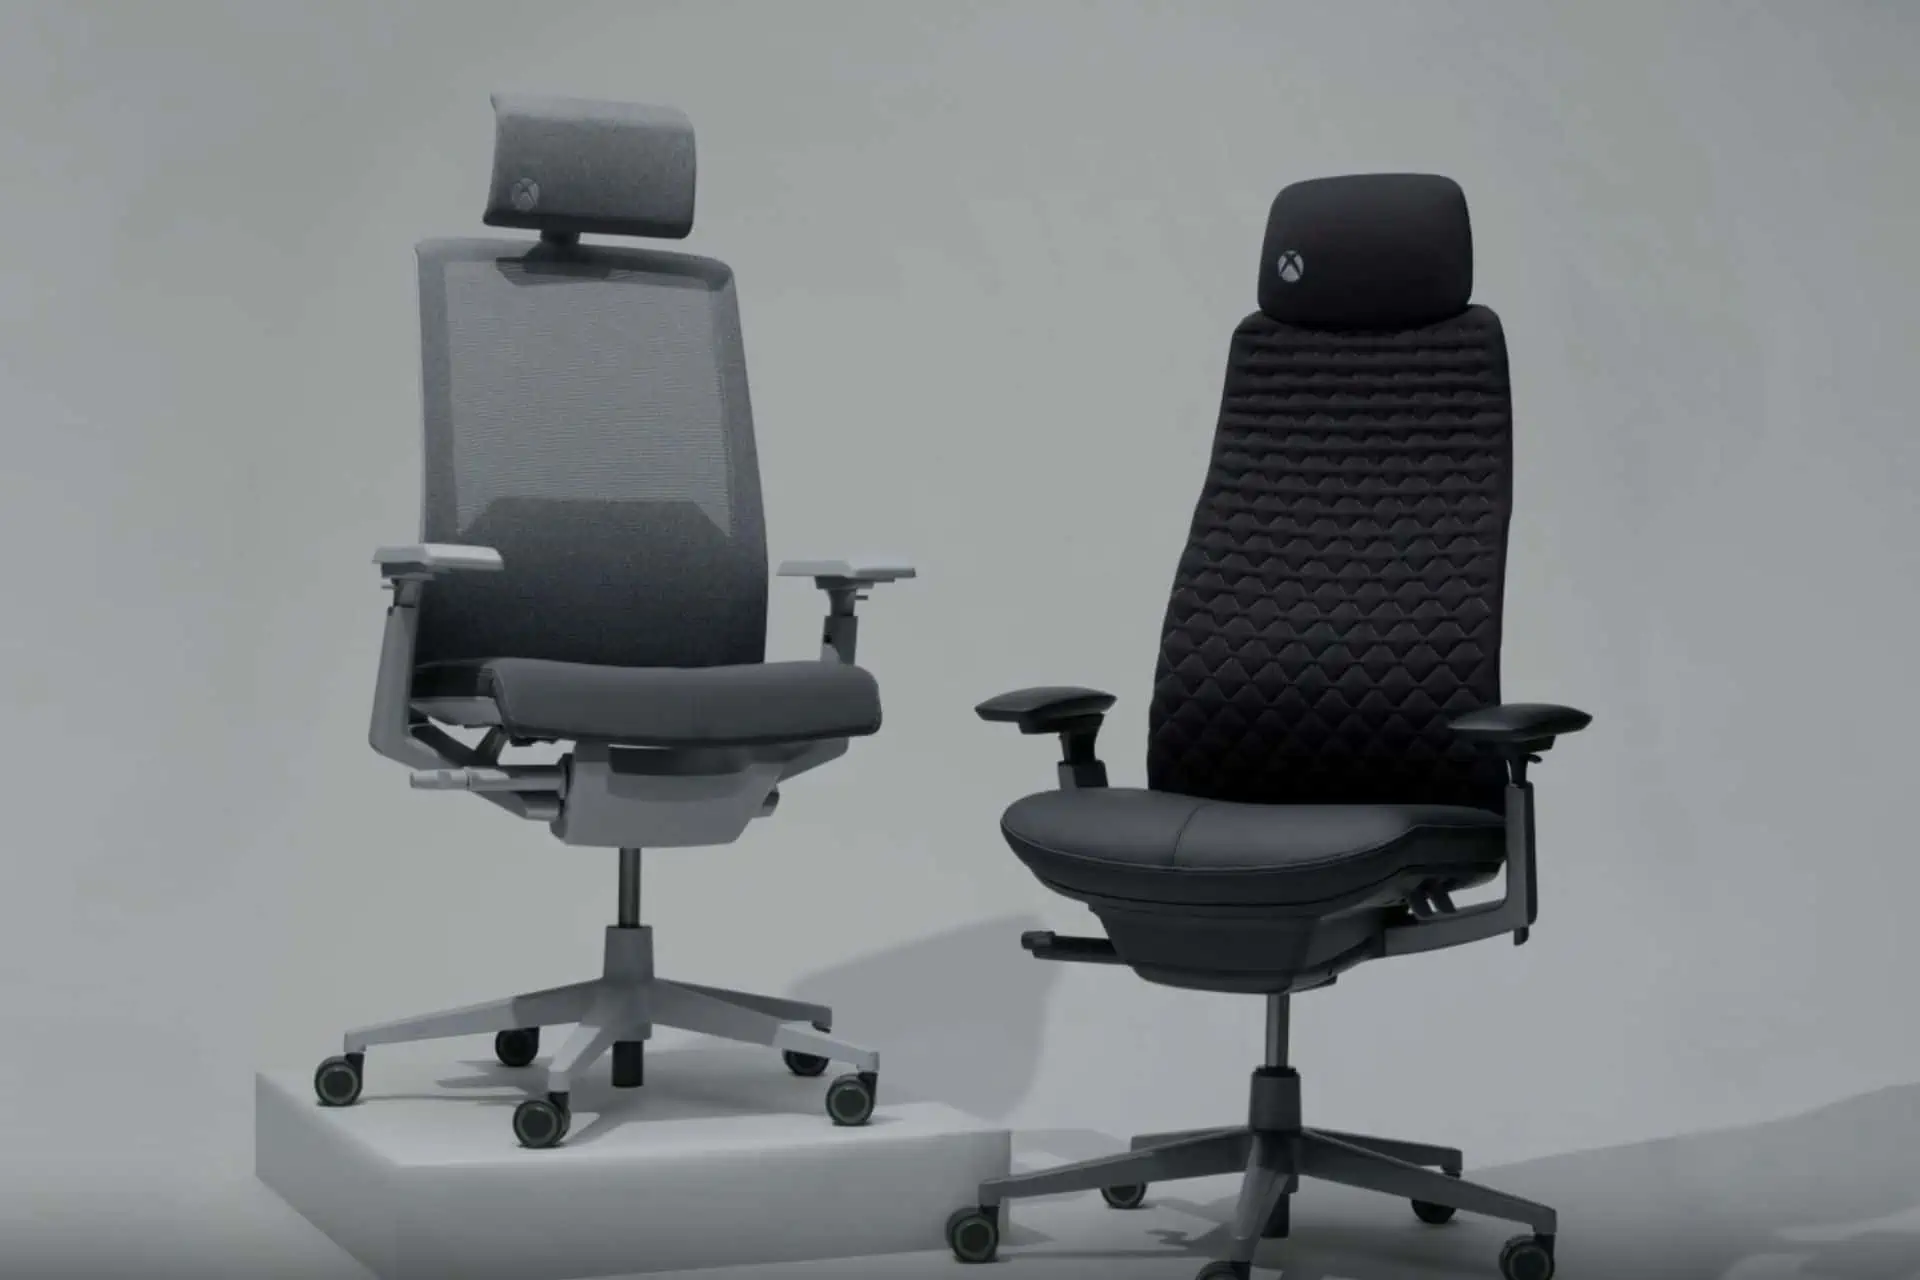 The Haworth Xbox gaming chair comes in 2 versions and it will let you play for hours without back pains